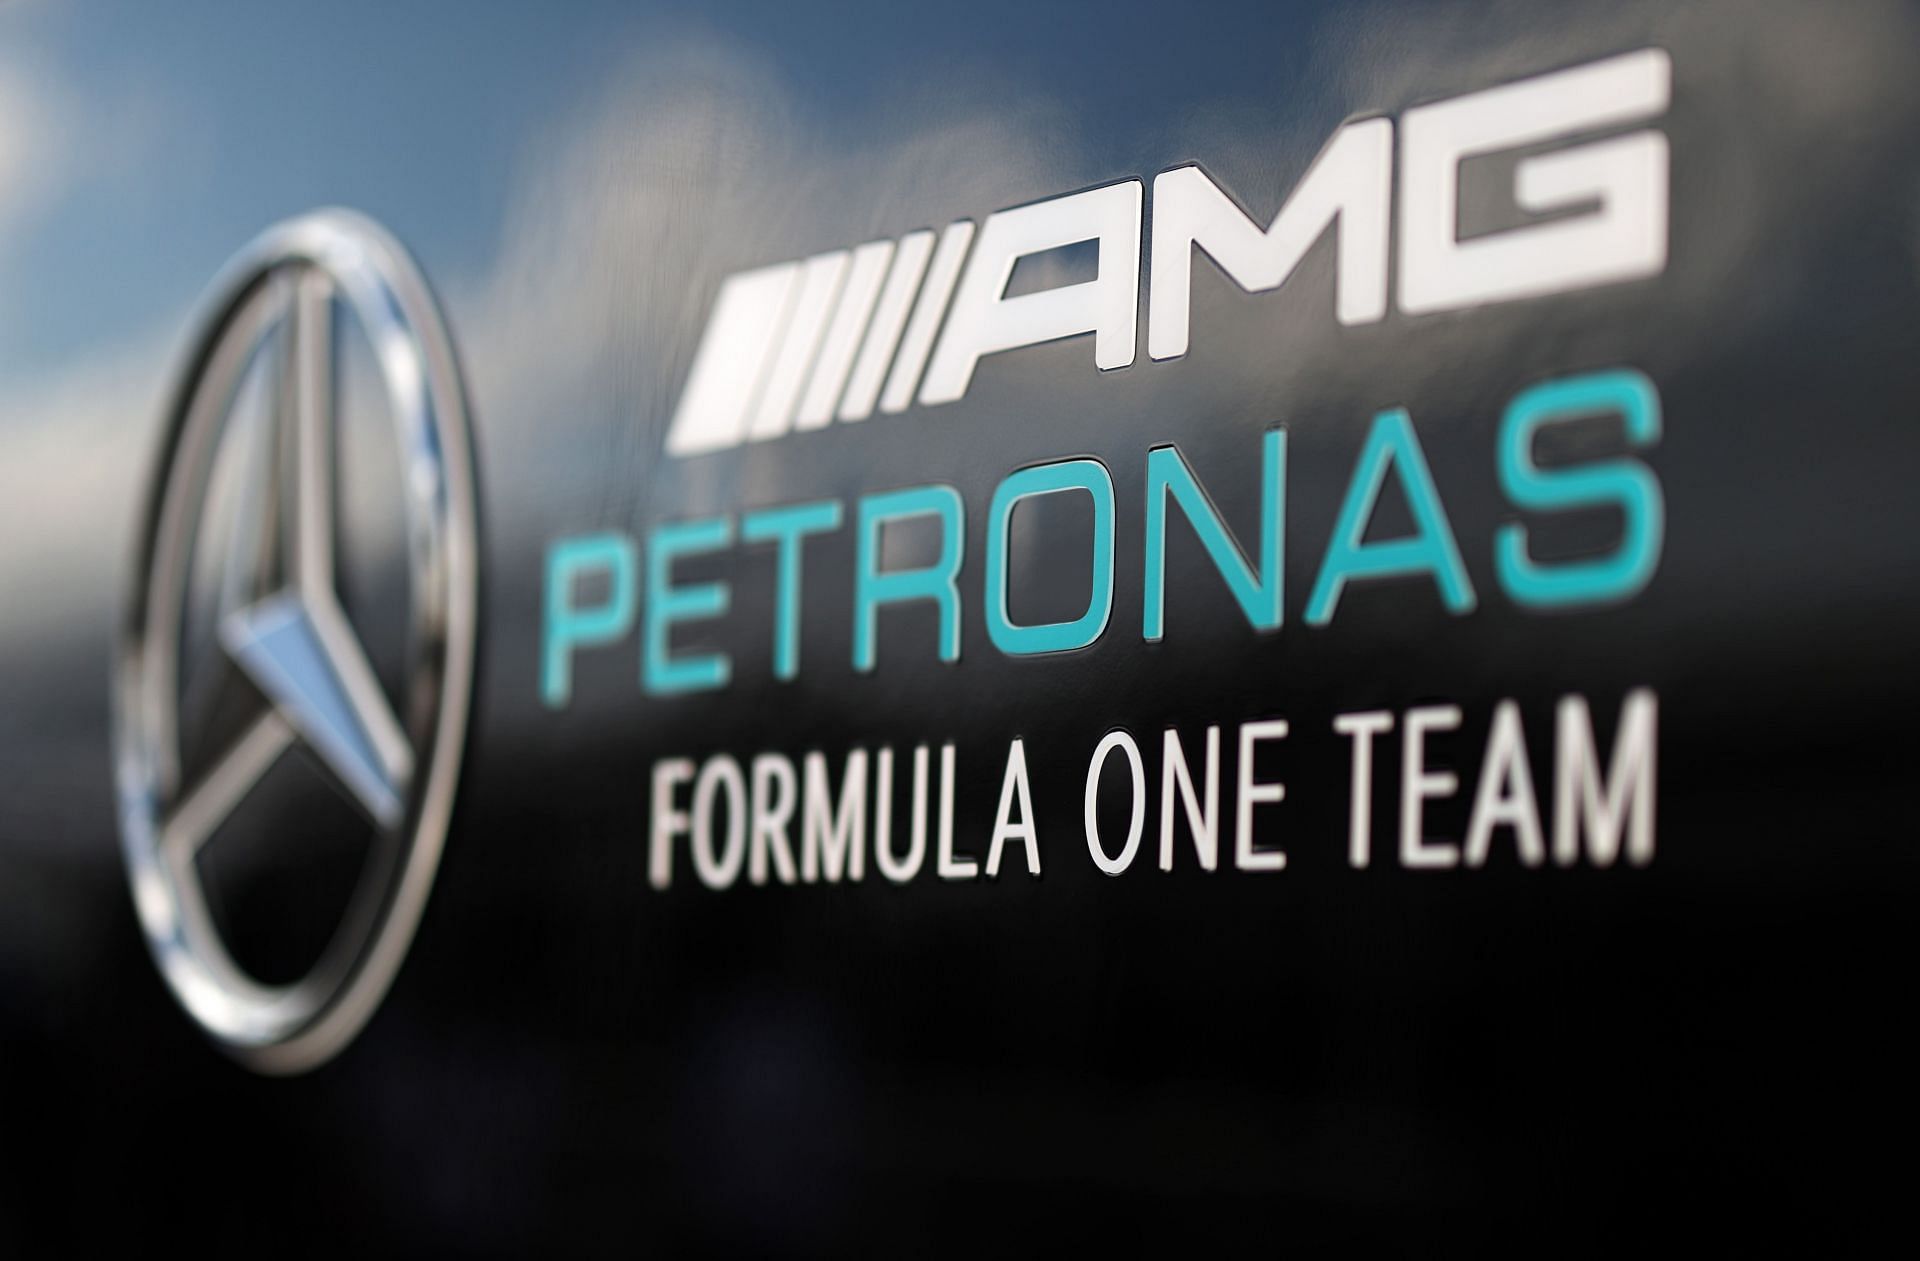 The Mercedes GP logo in the Paddock during final practice ahead of the 2021 USGP. (Photo by Chris Graythen/Getty Images)